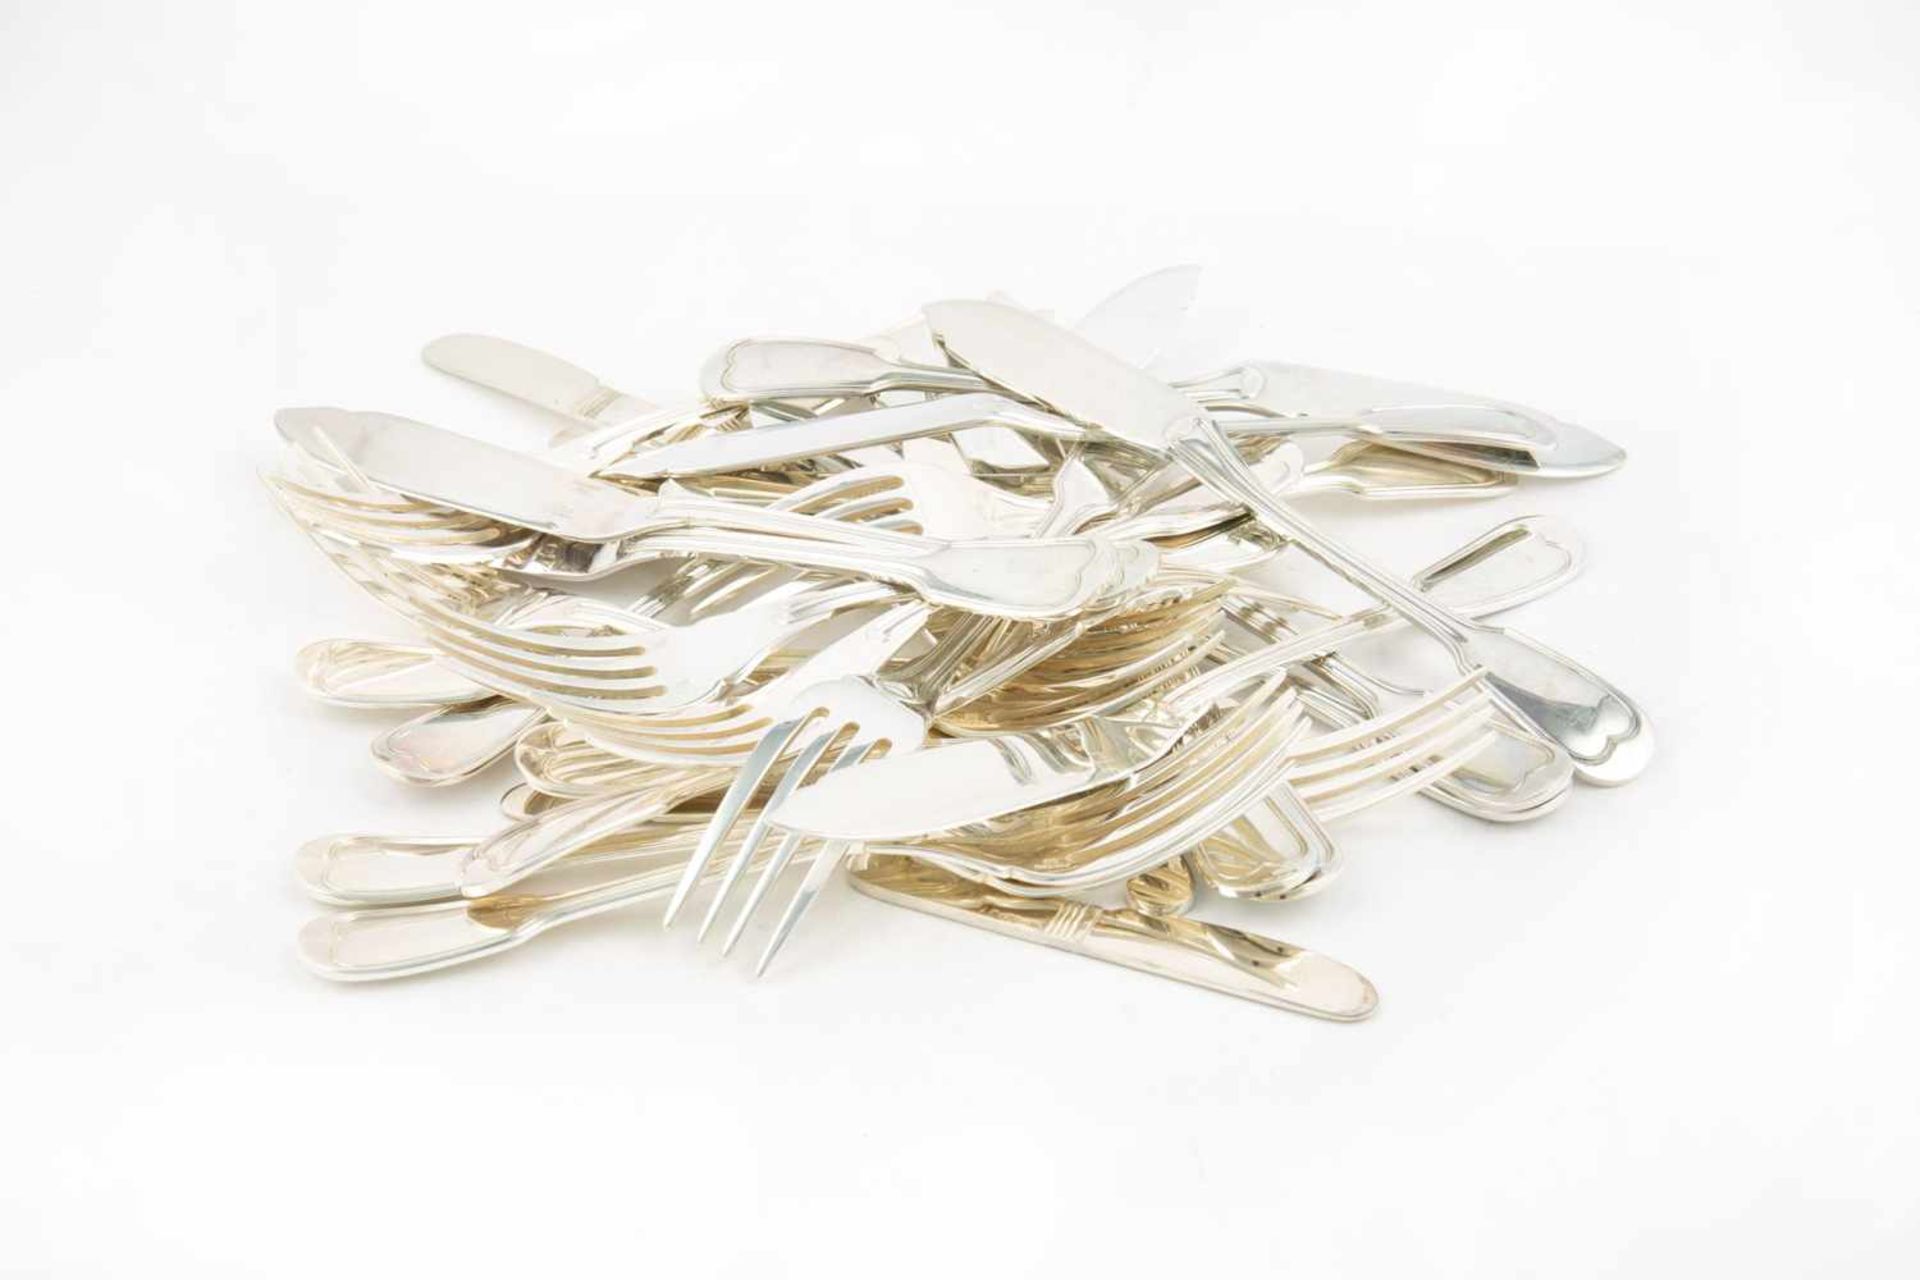 Fish cutlery for 12 people